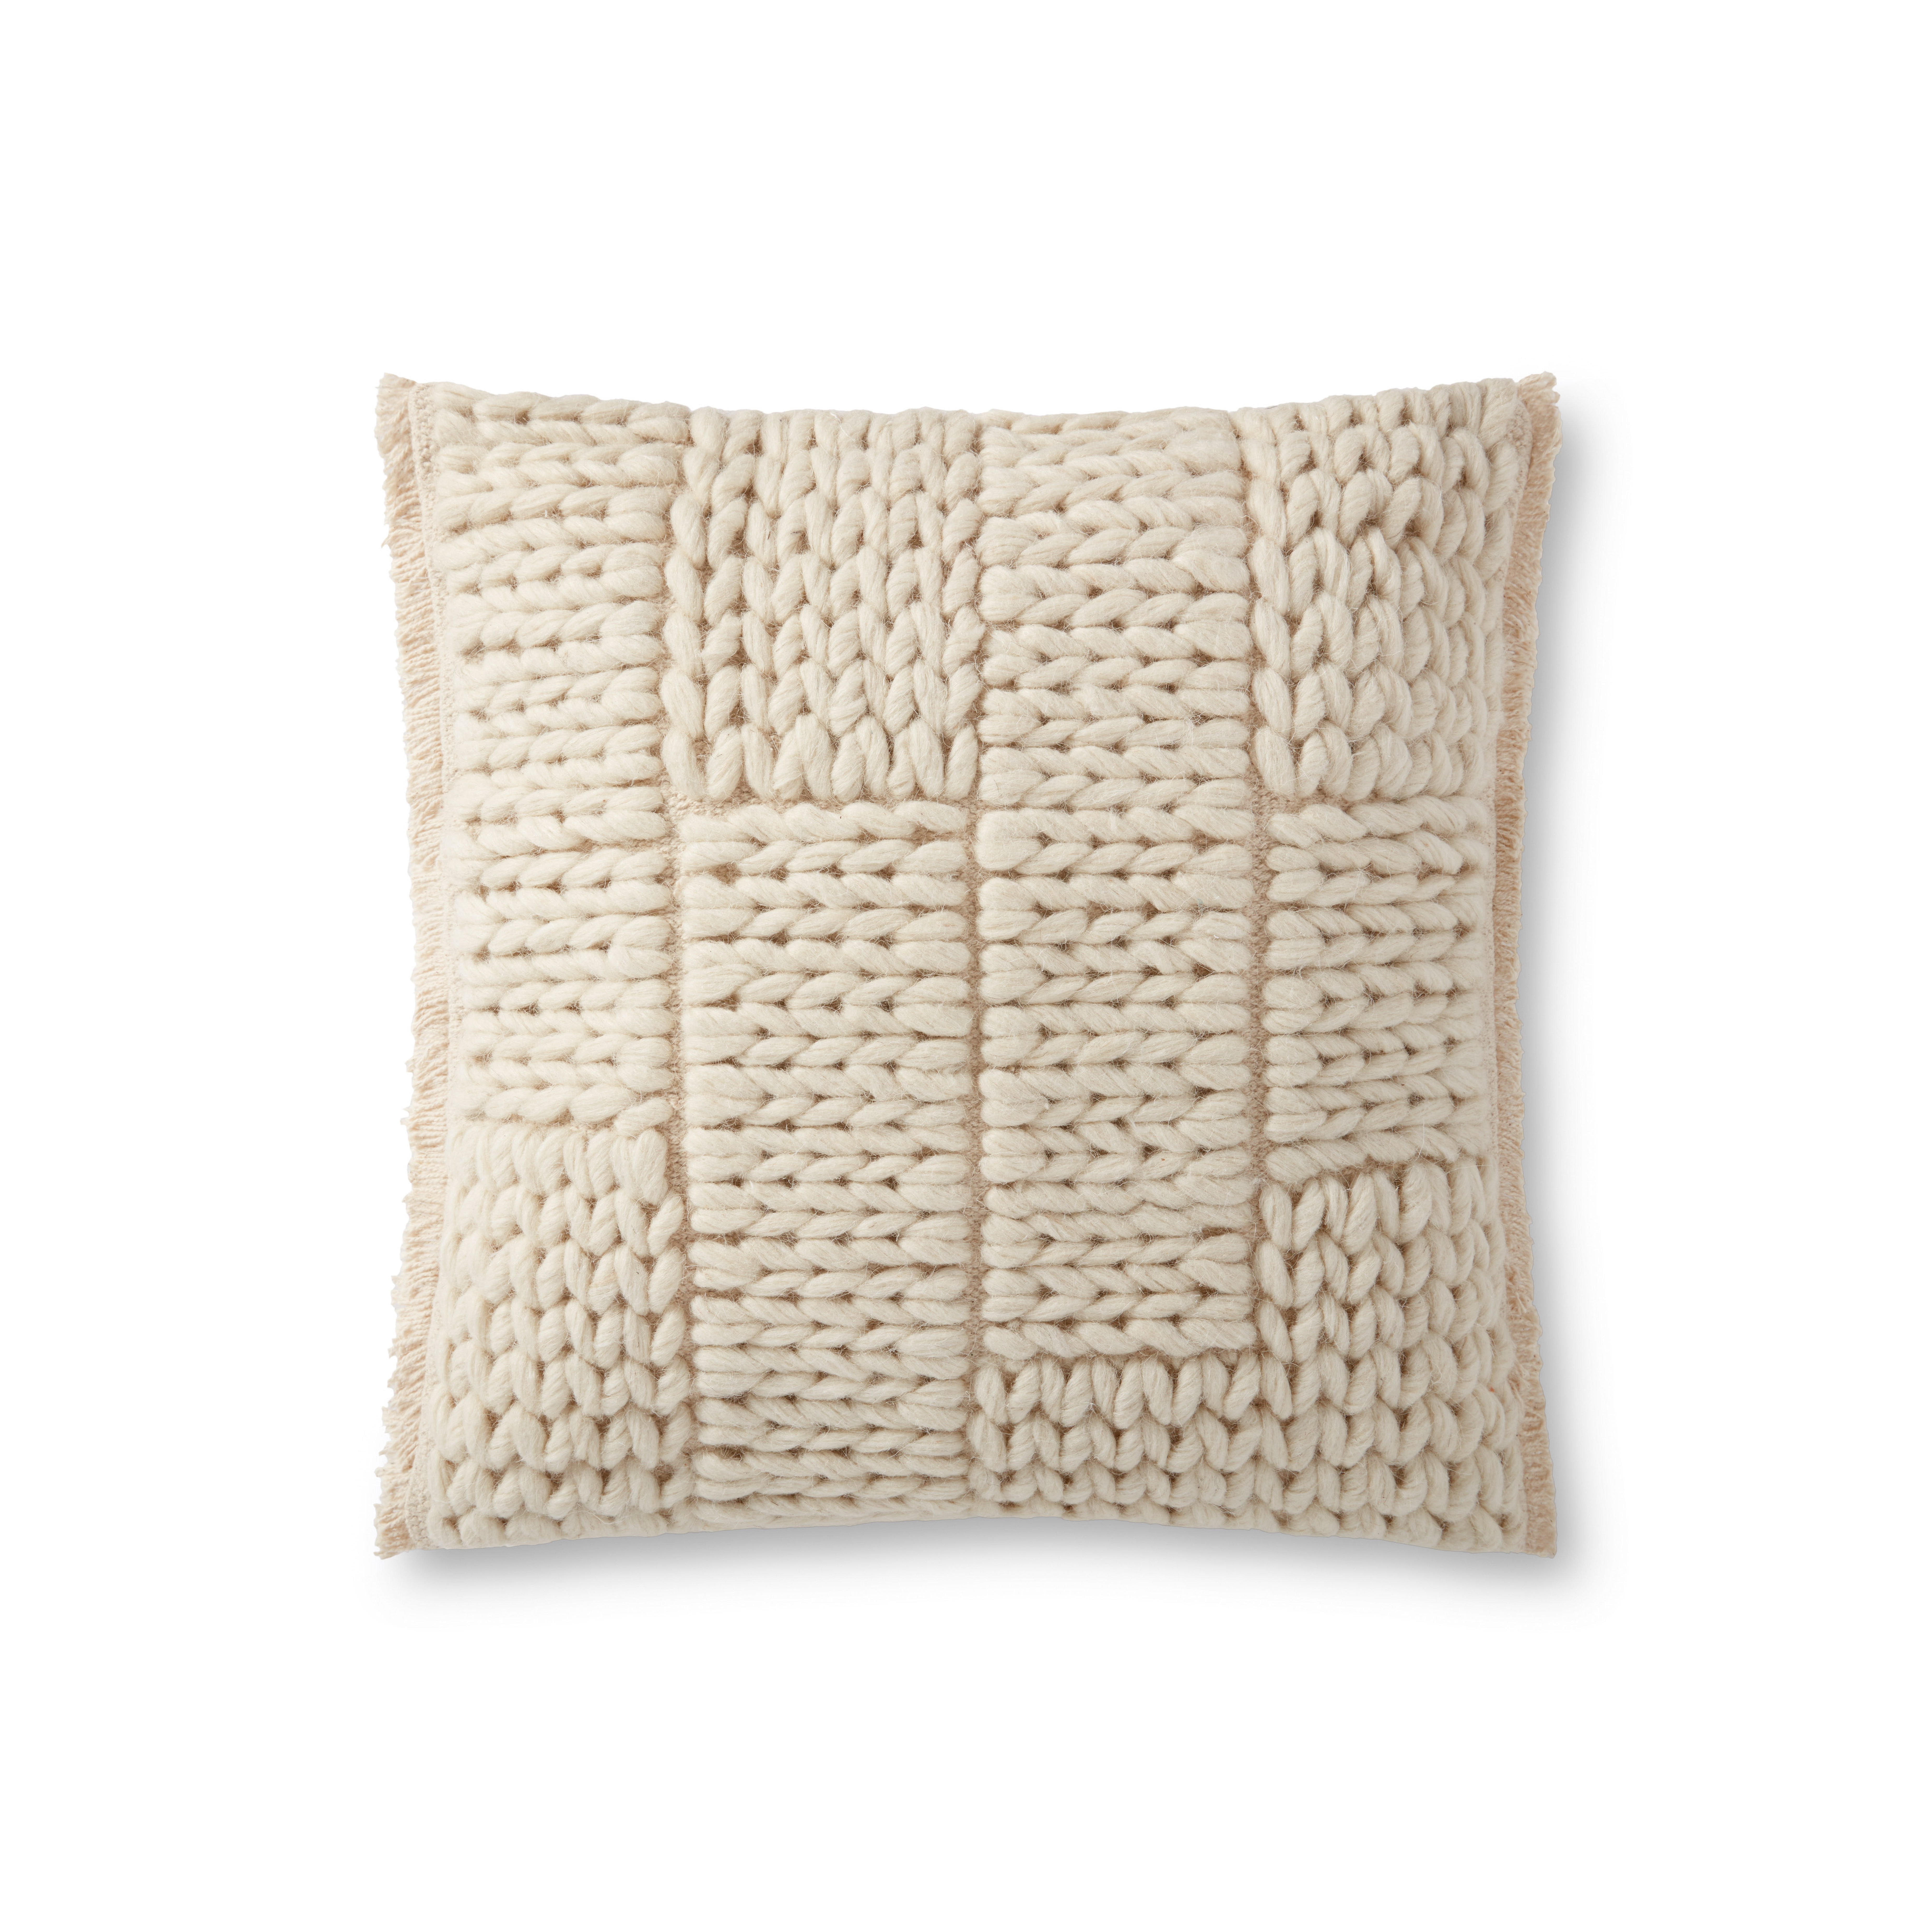 Loloi Pillows P0939 Natural 18" x 18" Cover w/Poly - Loloi Rugs